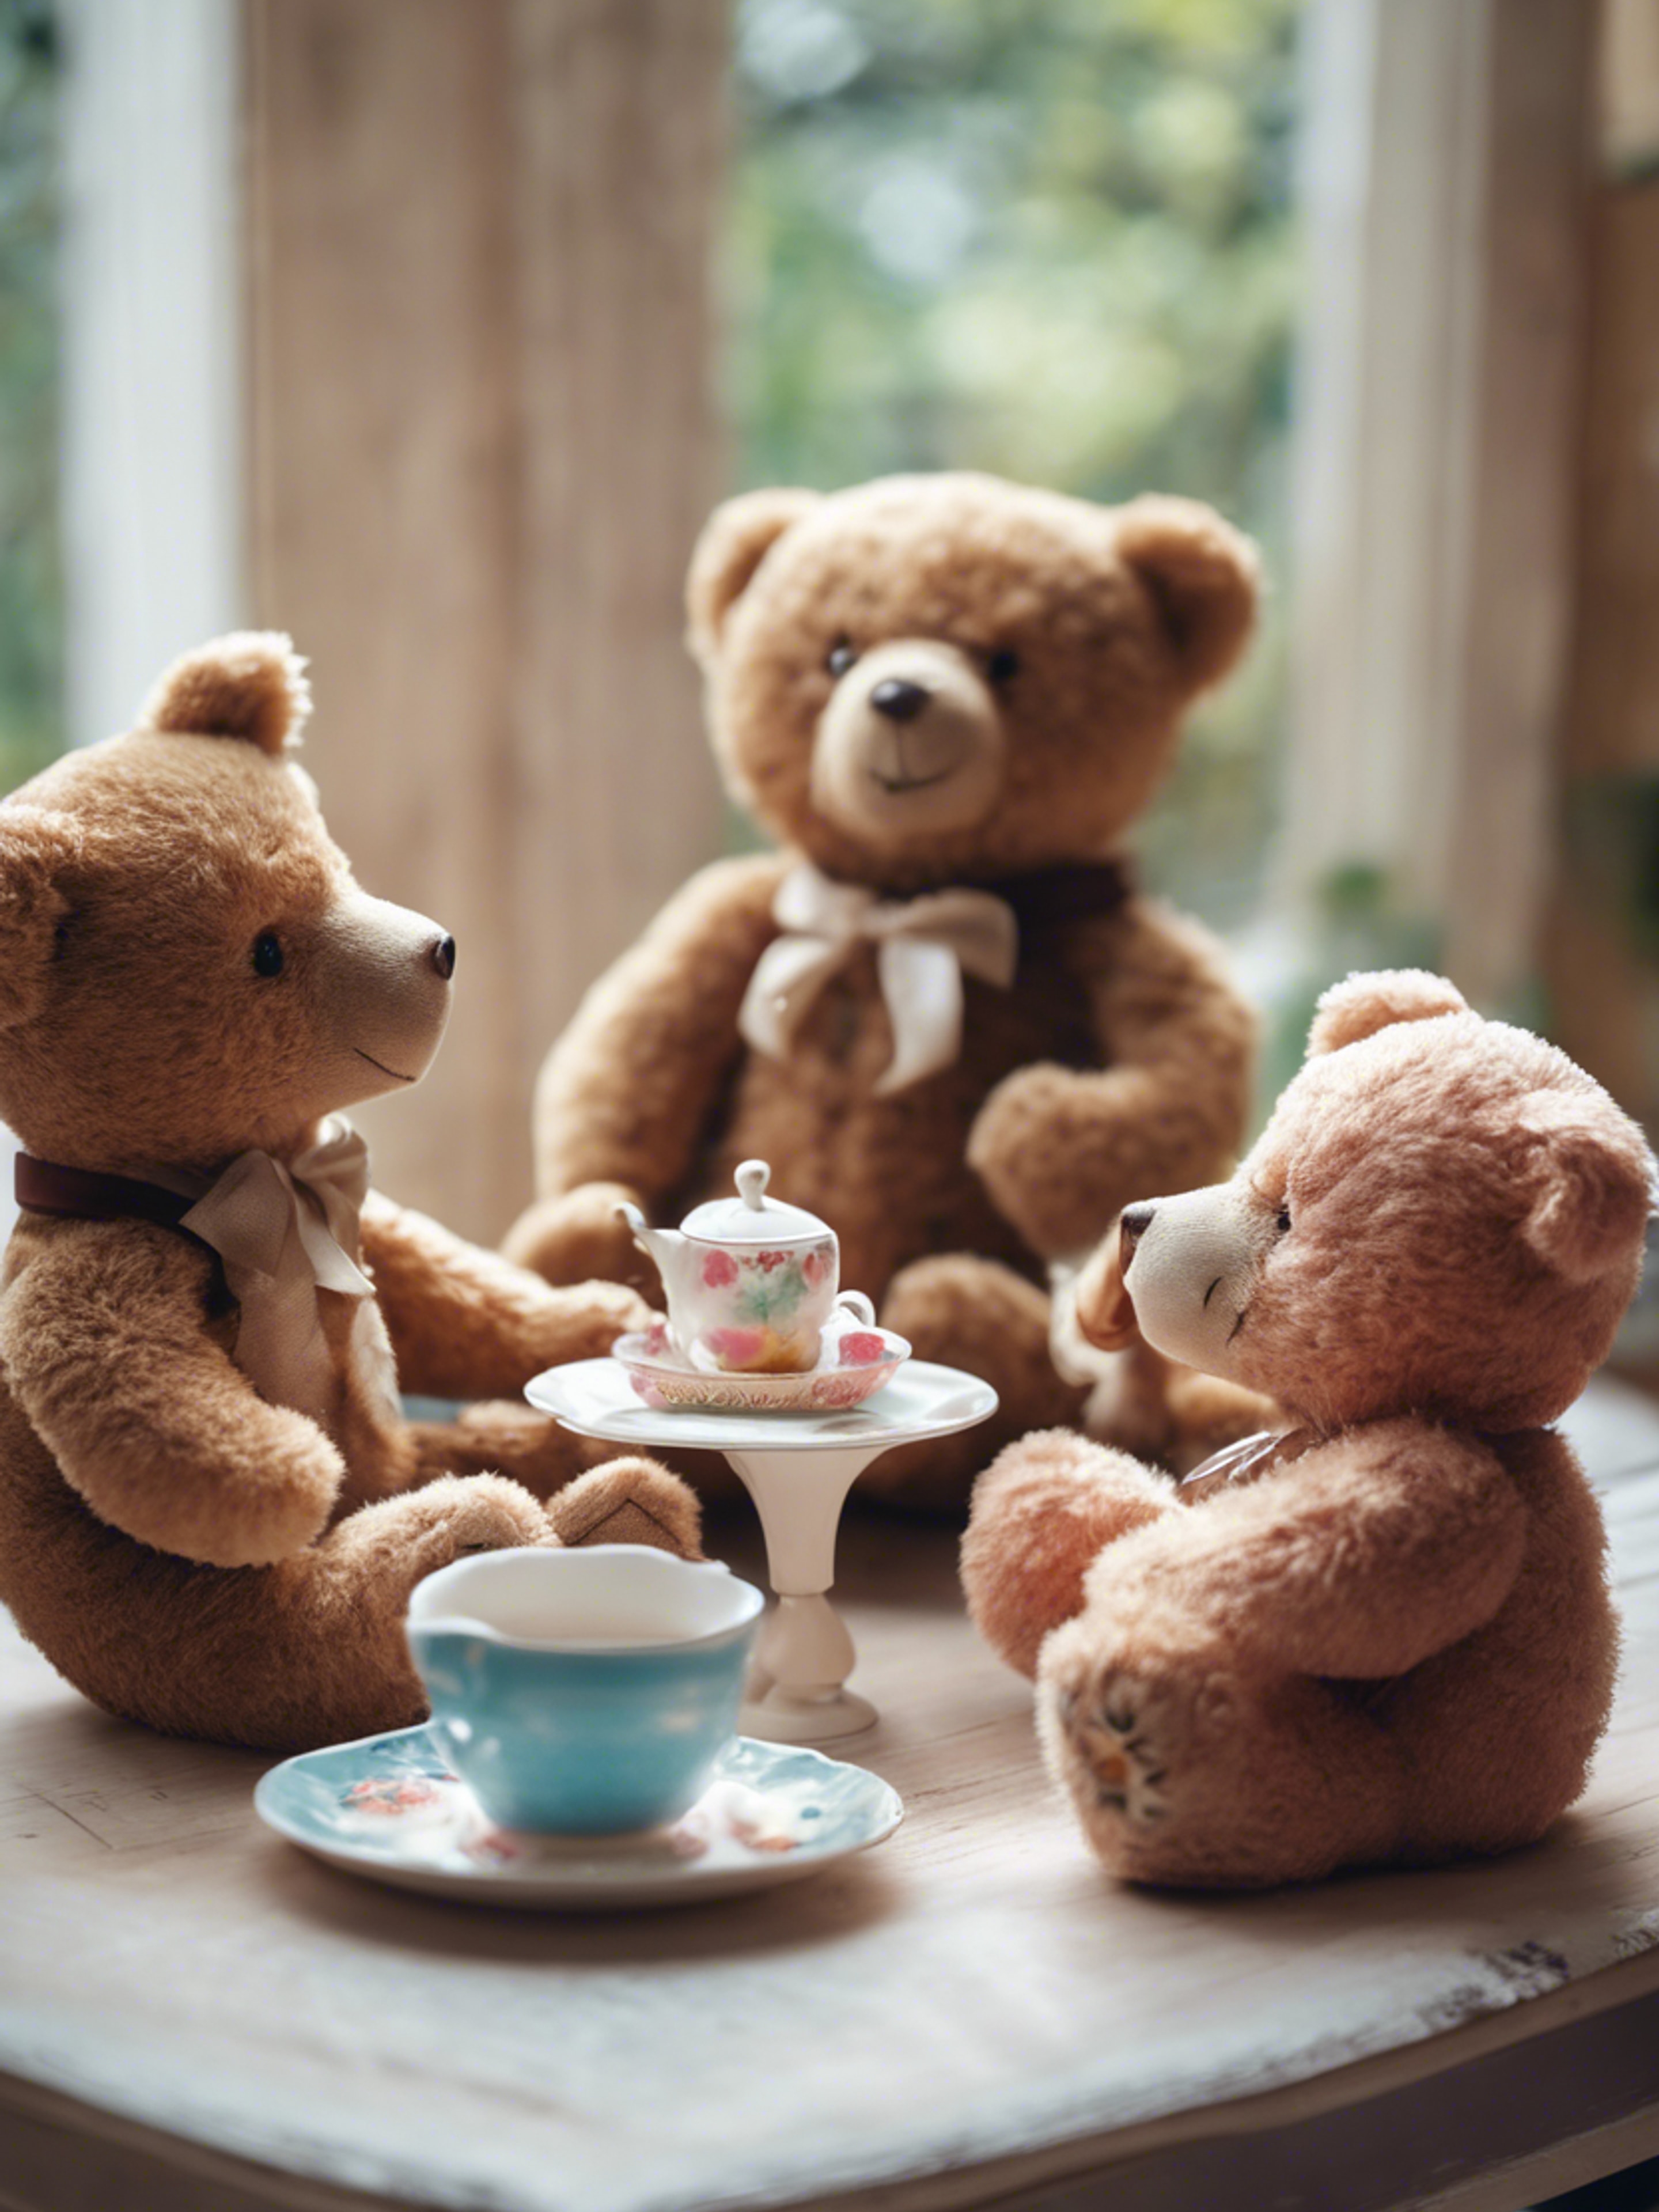 A group of teddy bears having a playful tea party in a child's room. Tapeta[5c3b9dbbb3984ccebf50]